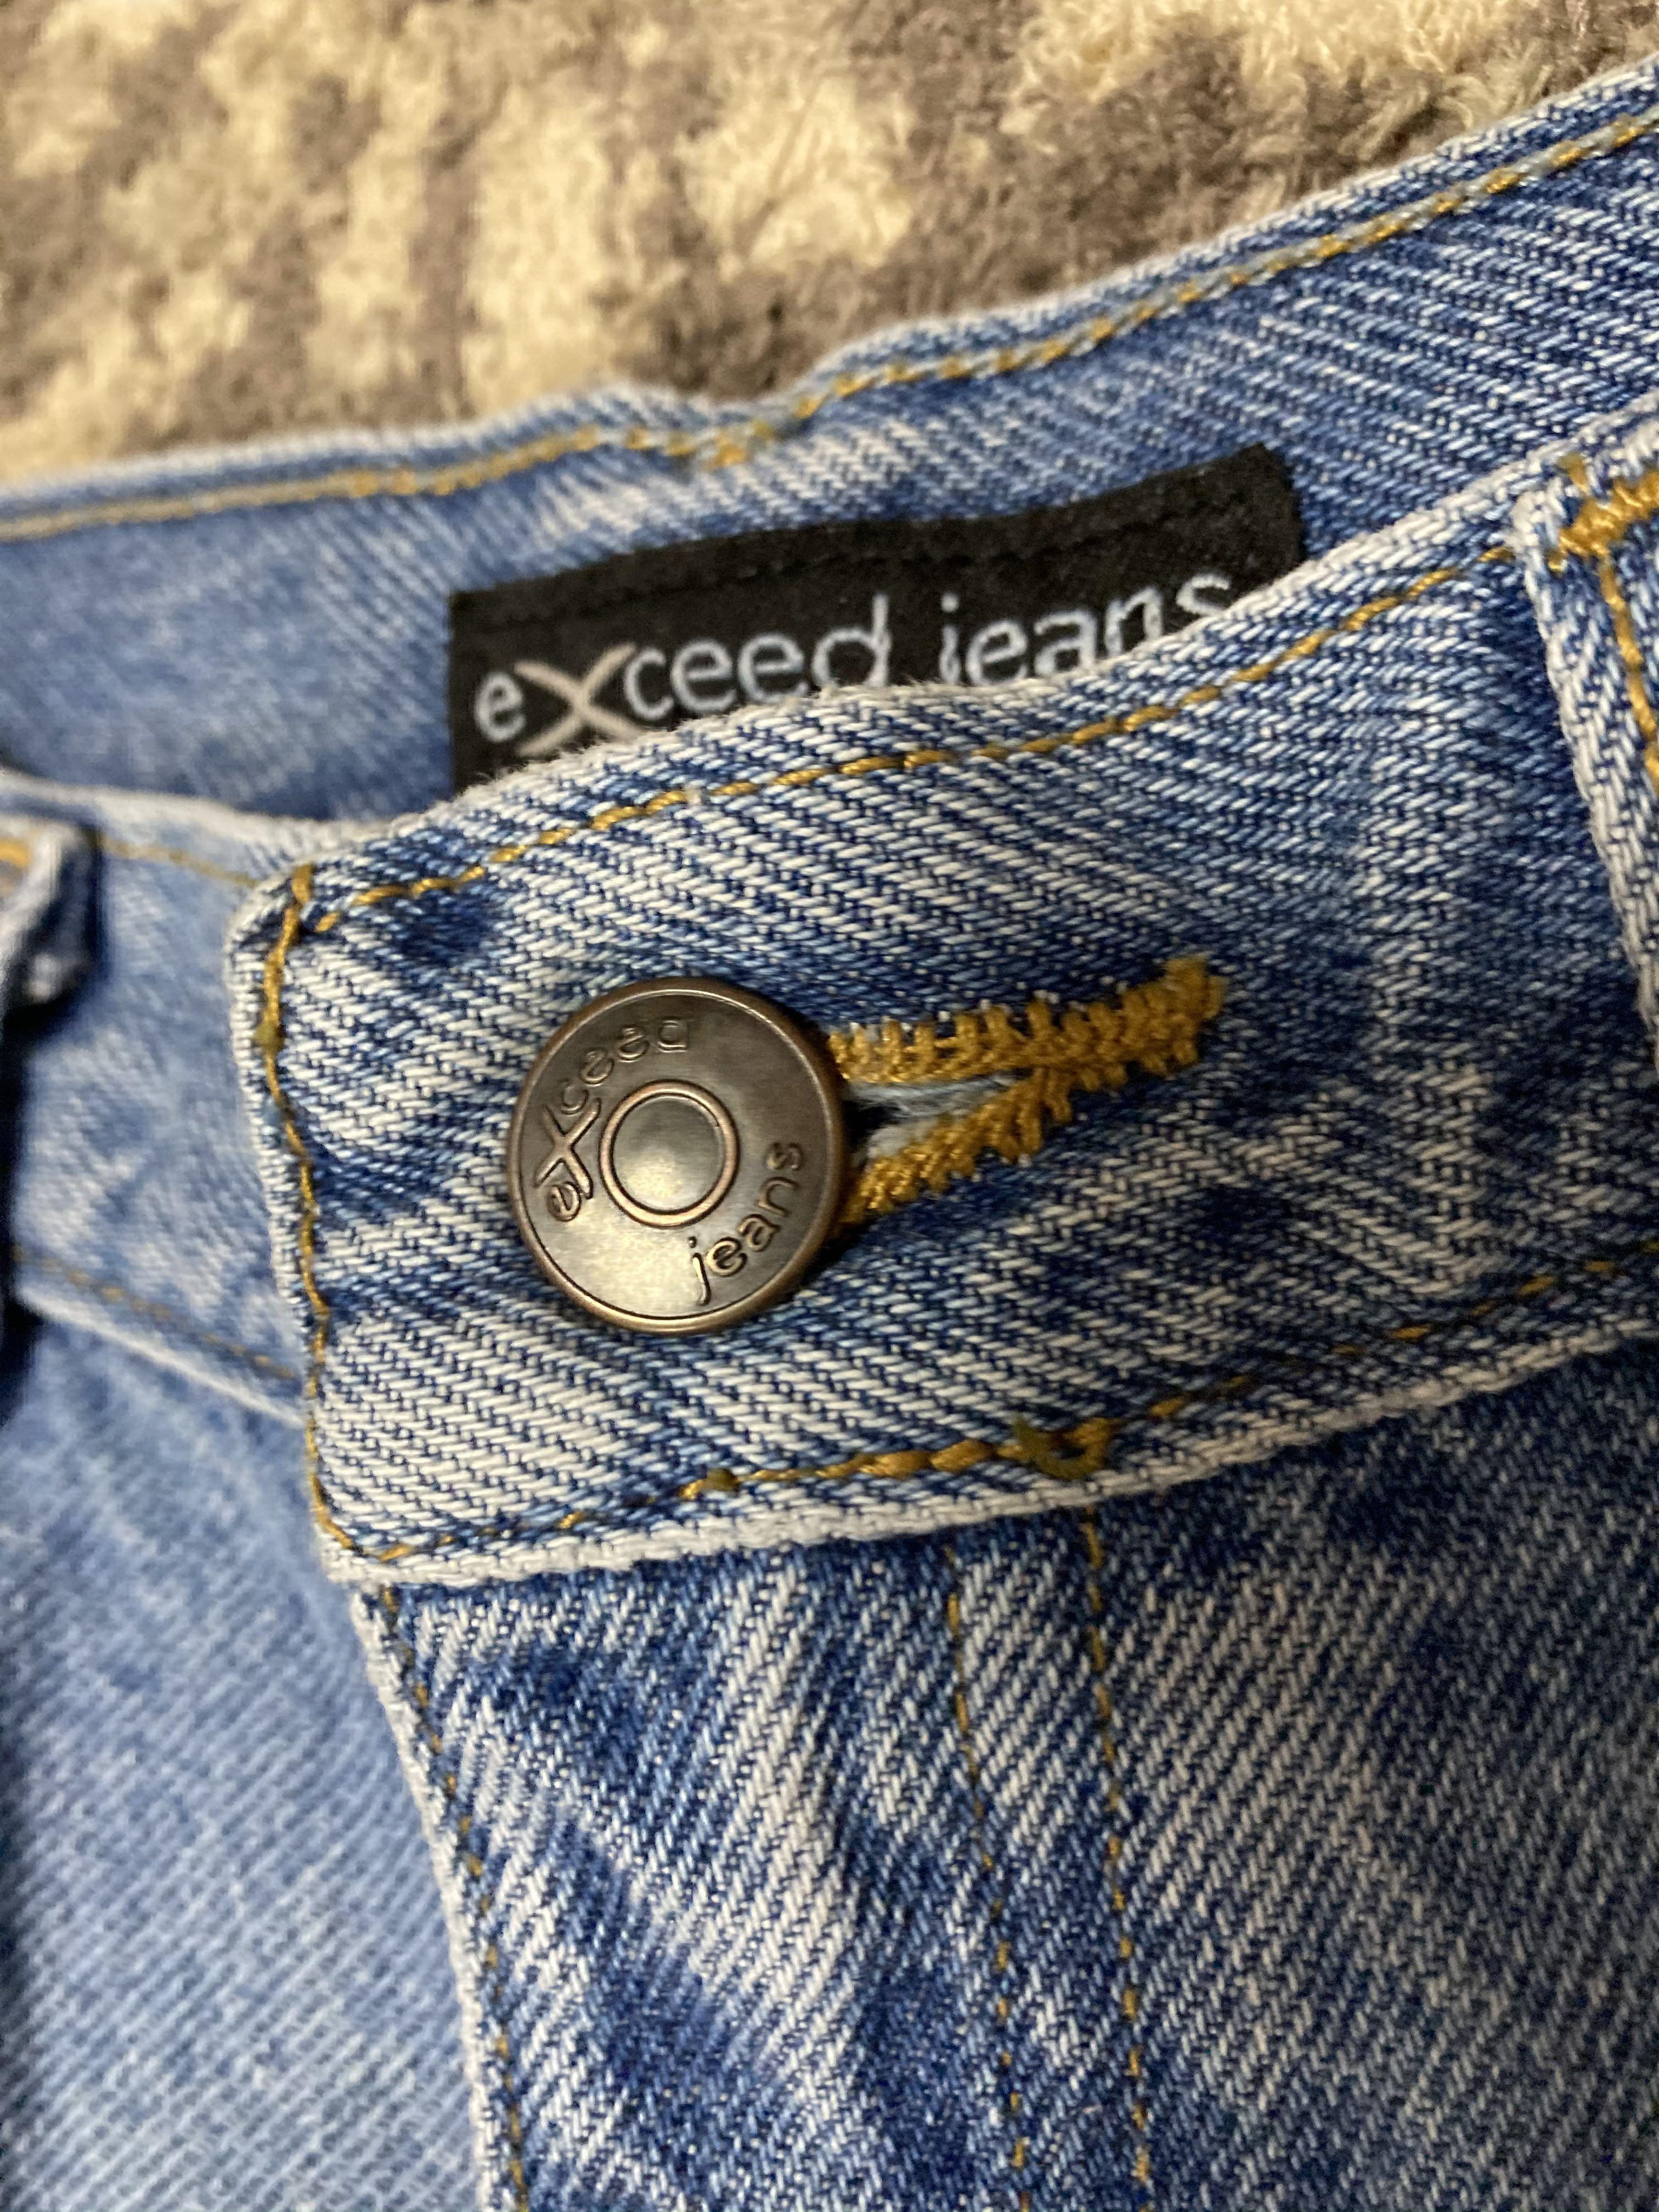 Exceed, Jeans